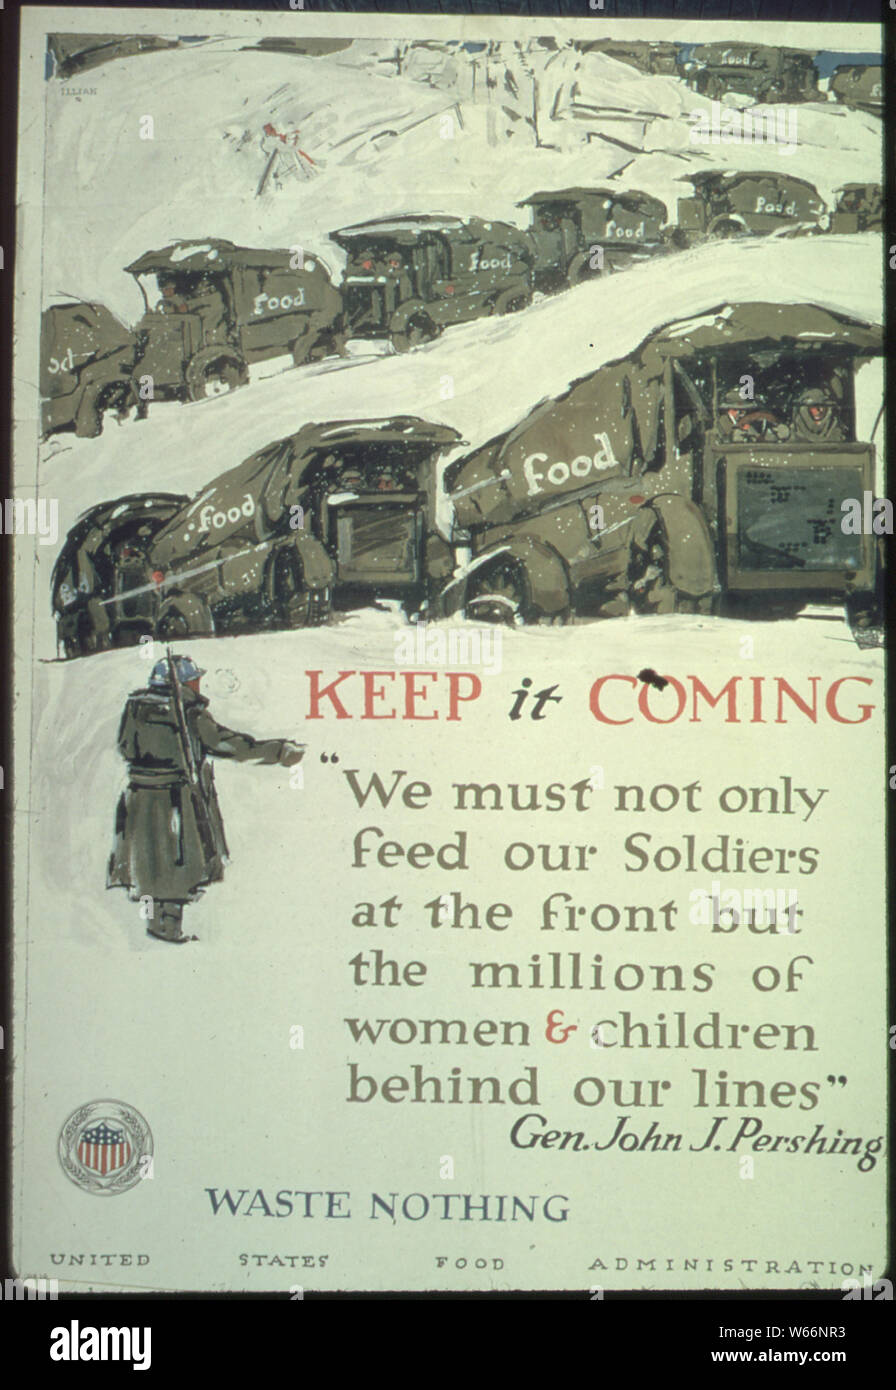 Keep It Coming. We must not only feed our Soldiers at the front but the millions of women and children behind our lines. Waste Nothing. , Gen. John J. Pershing, ca. 1918 - ca. 1918 Stock Photo